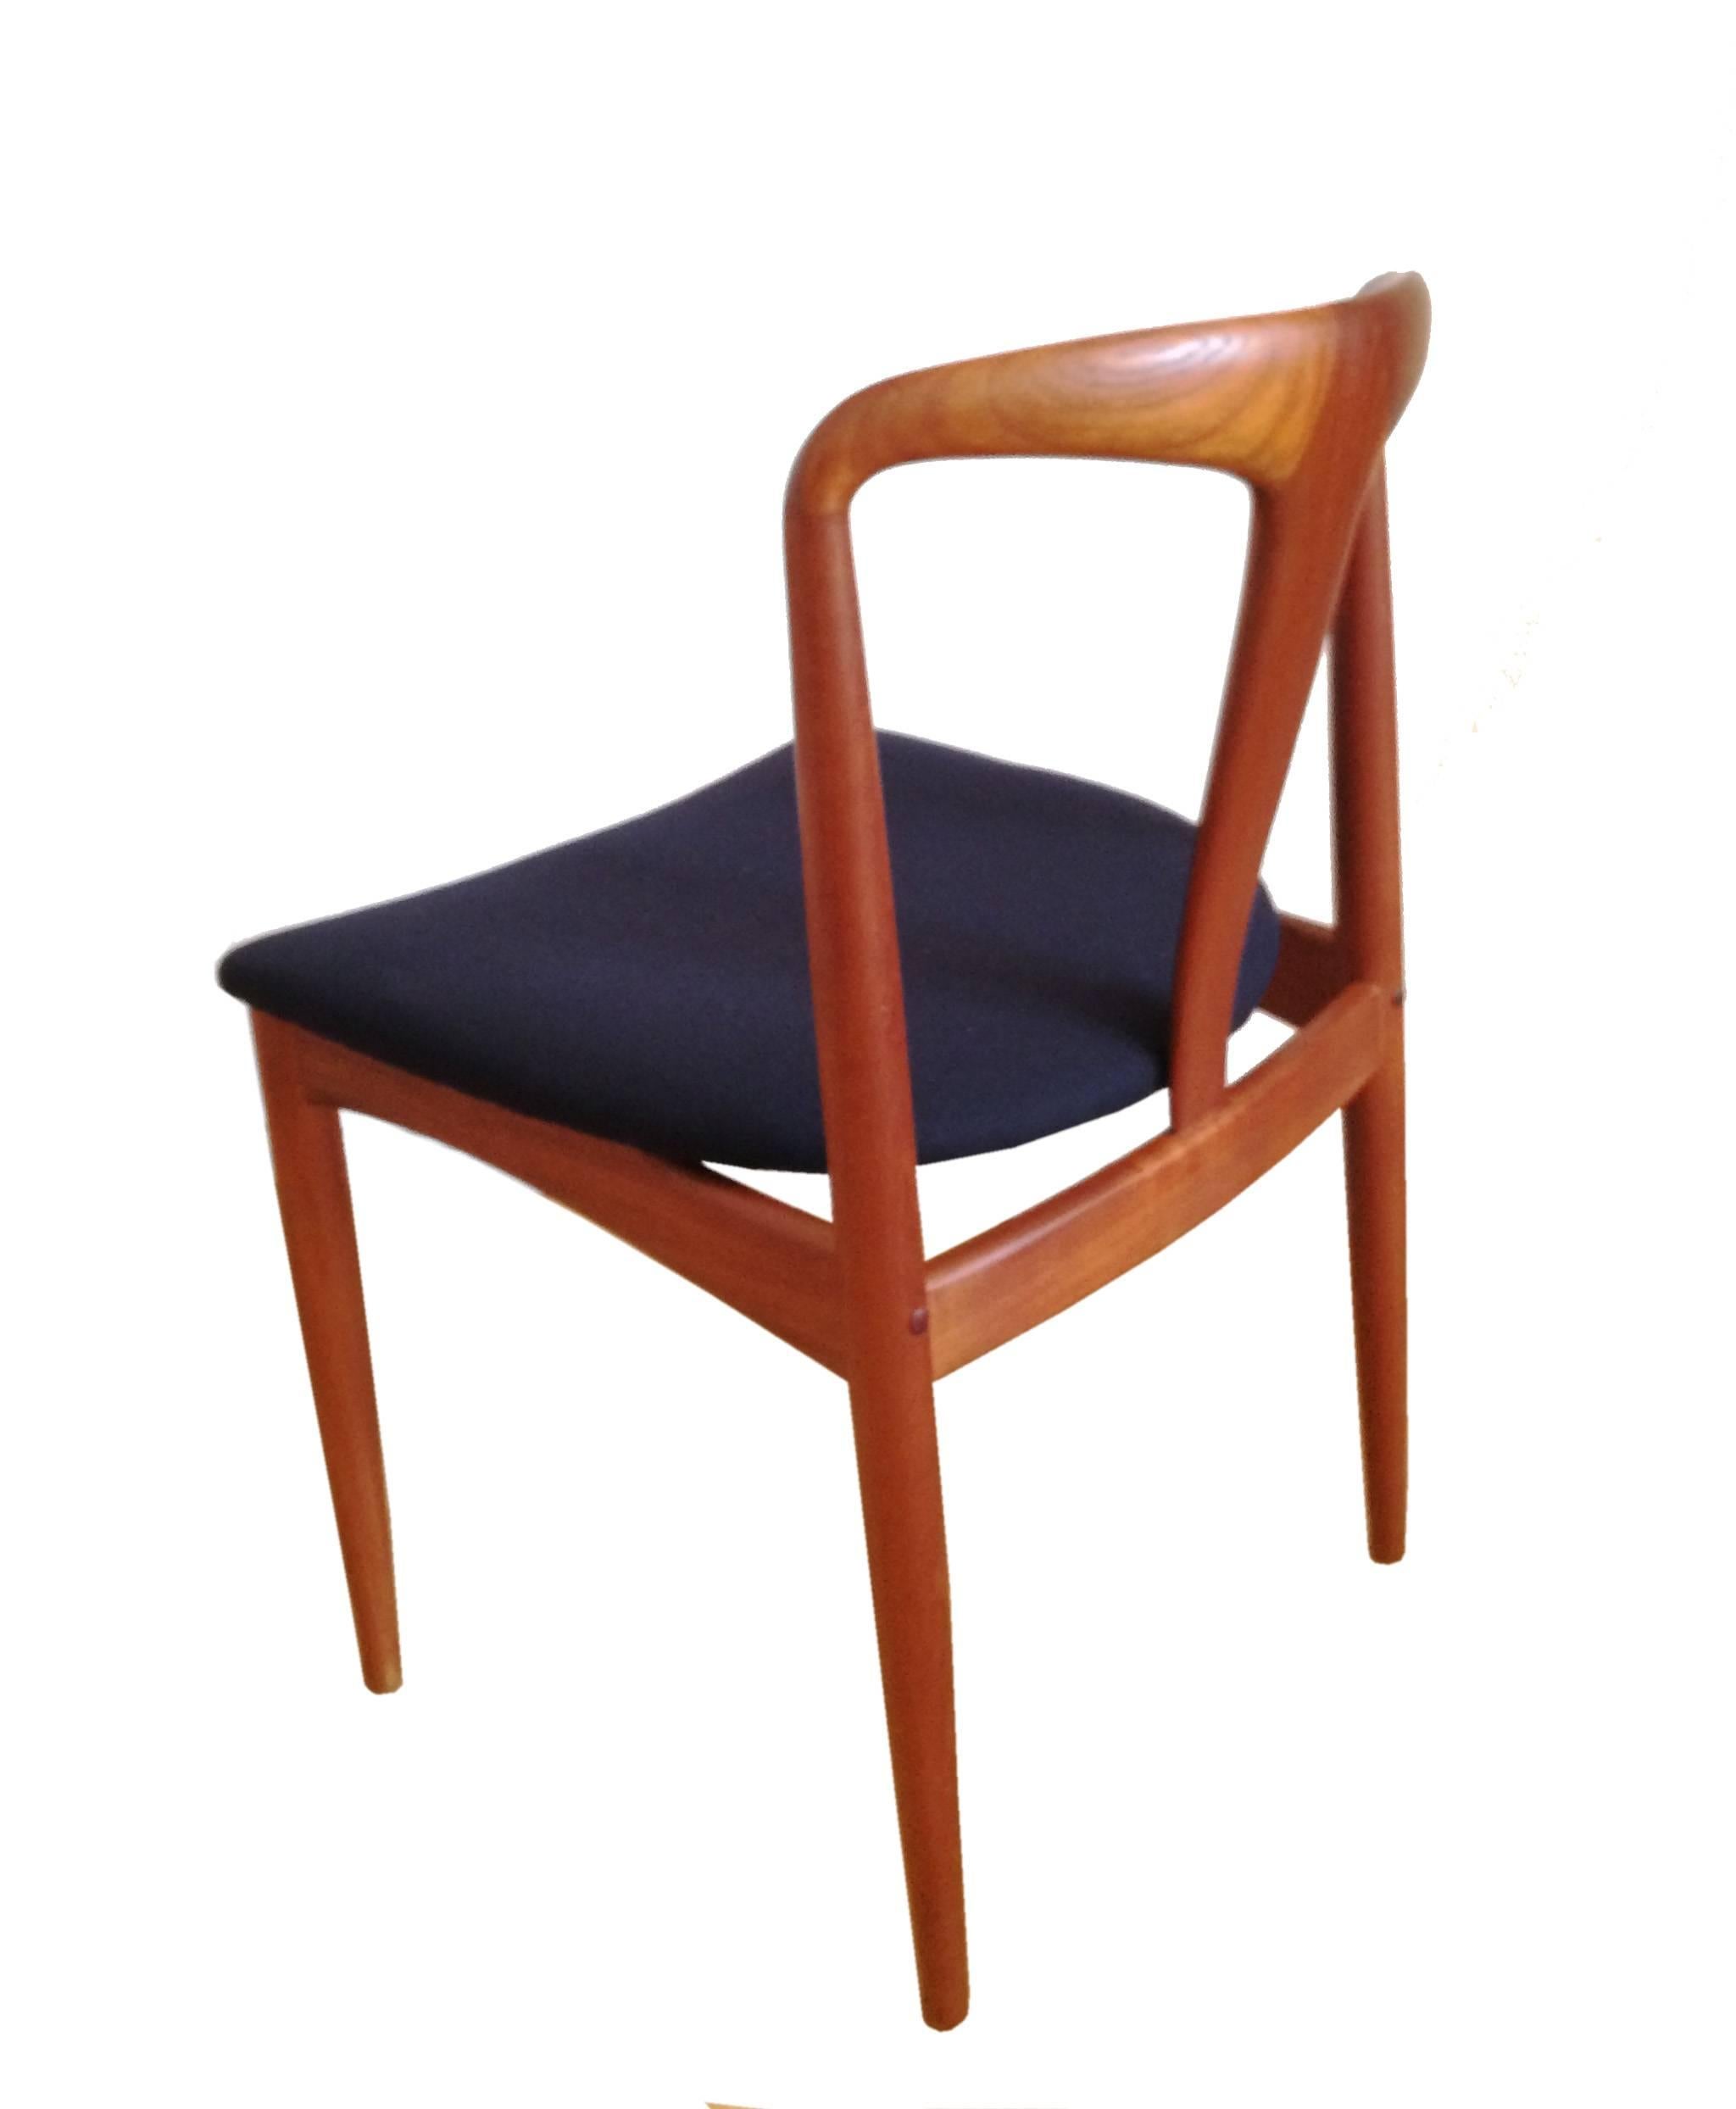 Danish Mid-Century Teak Juliane Chair by Johannes Andersen for Uldum, 1960s In Excellent Condition For Sale In Basel, CH